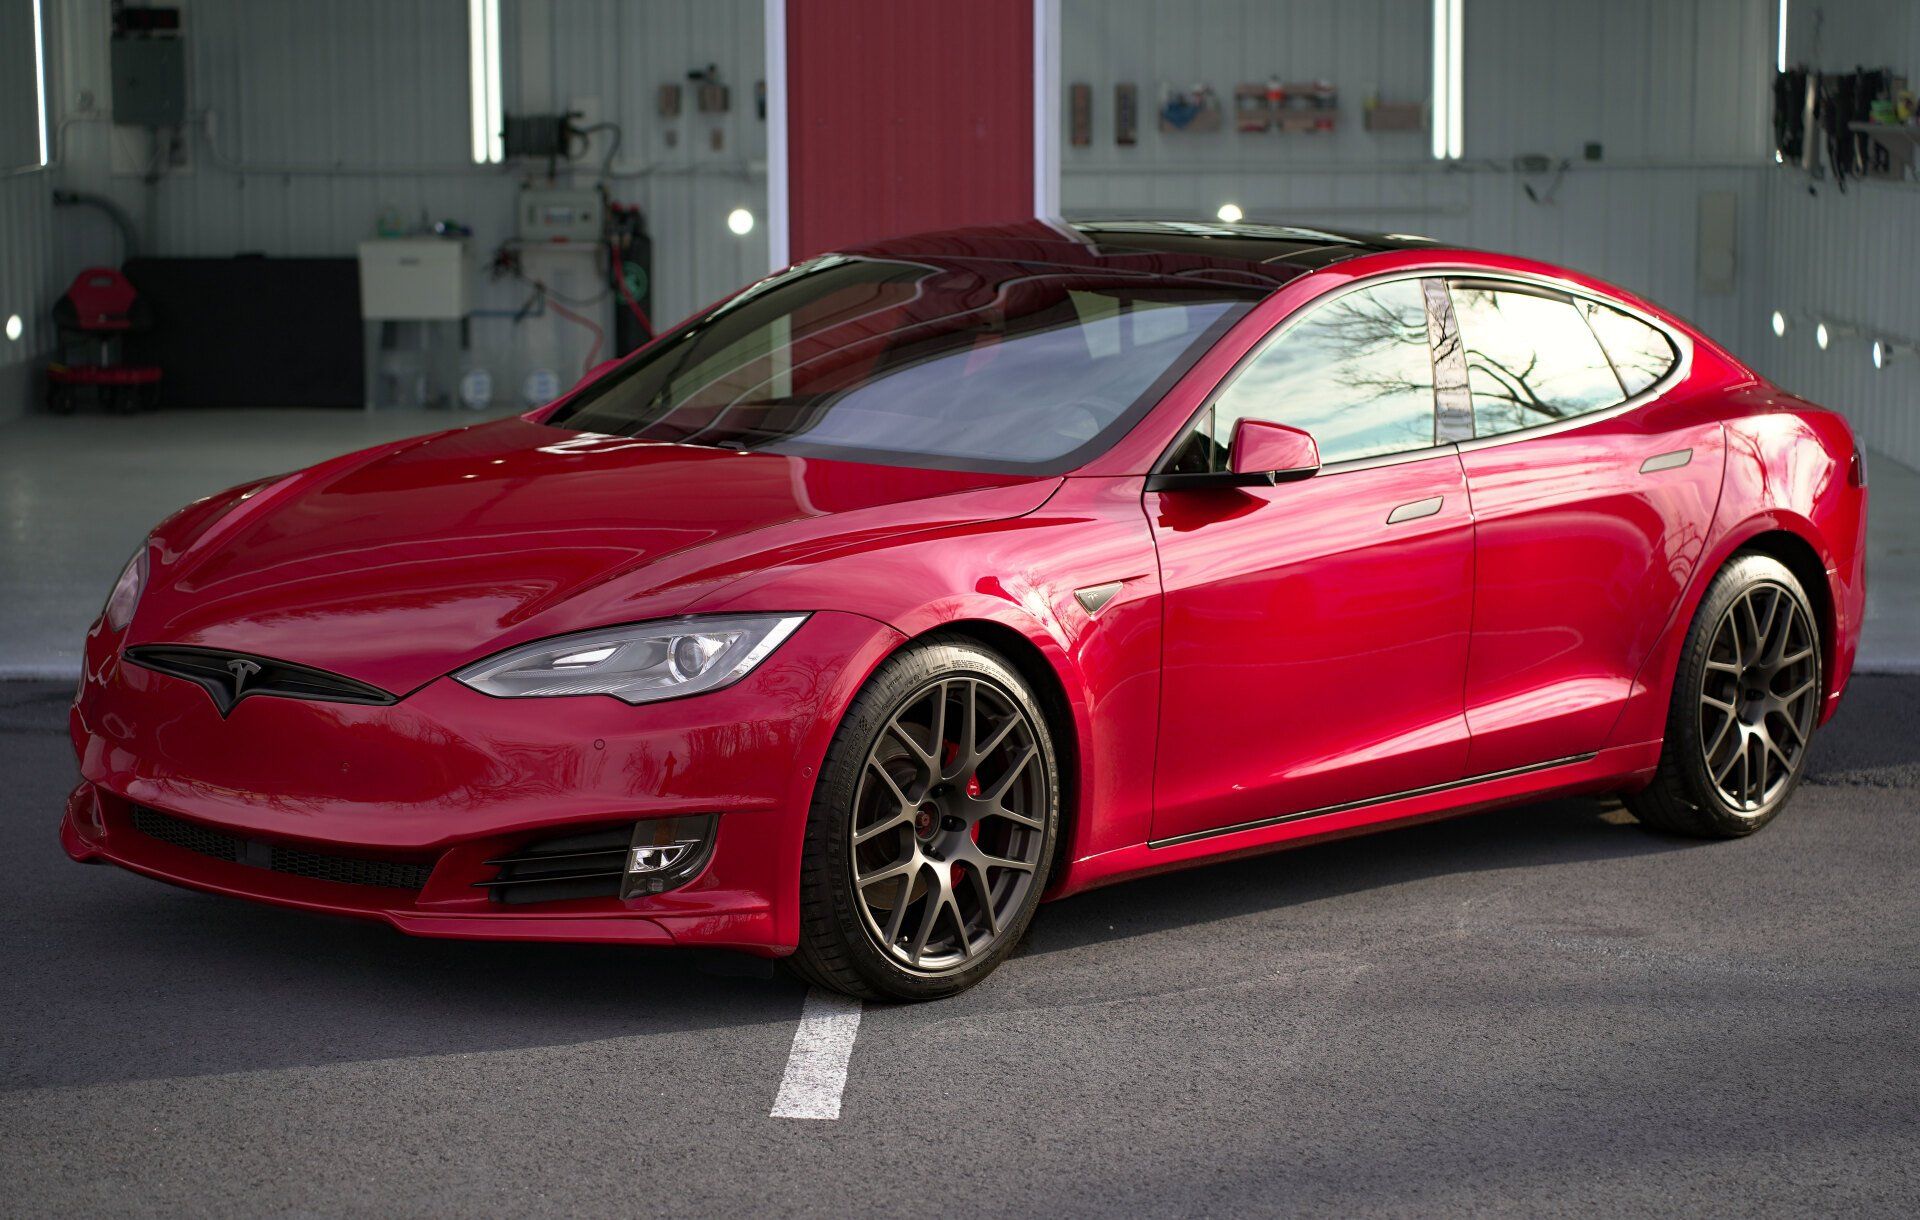 a red tesla model s is parked in a parking lot .